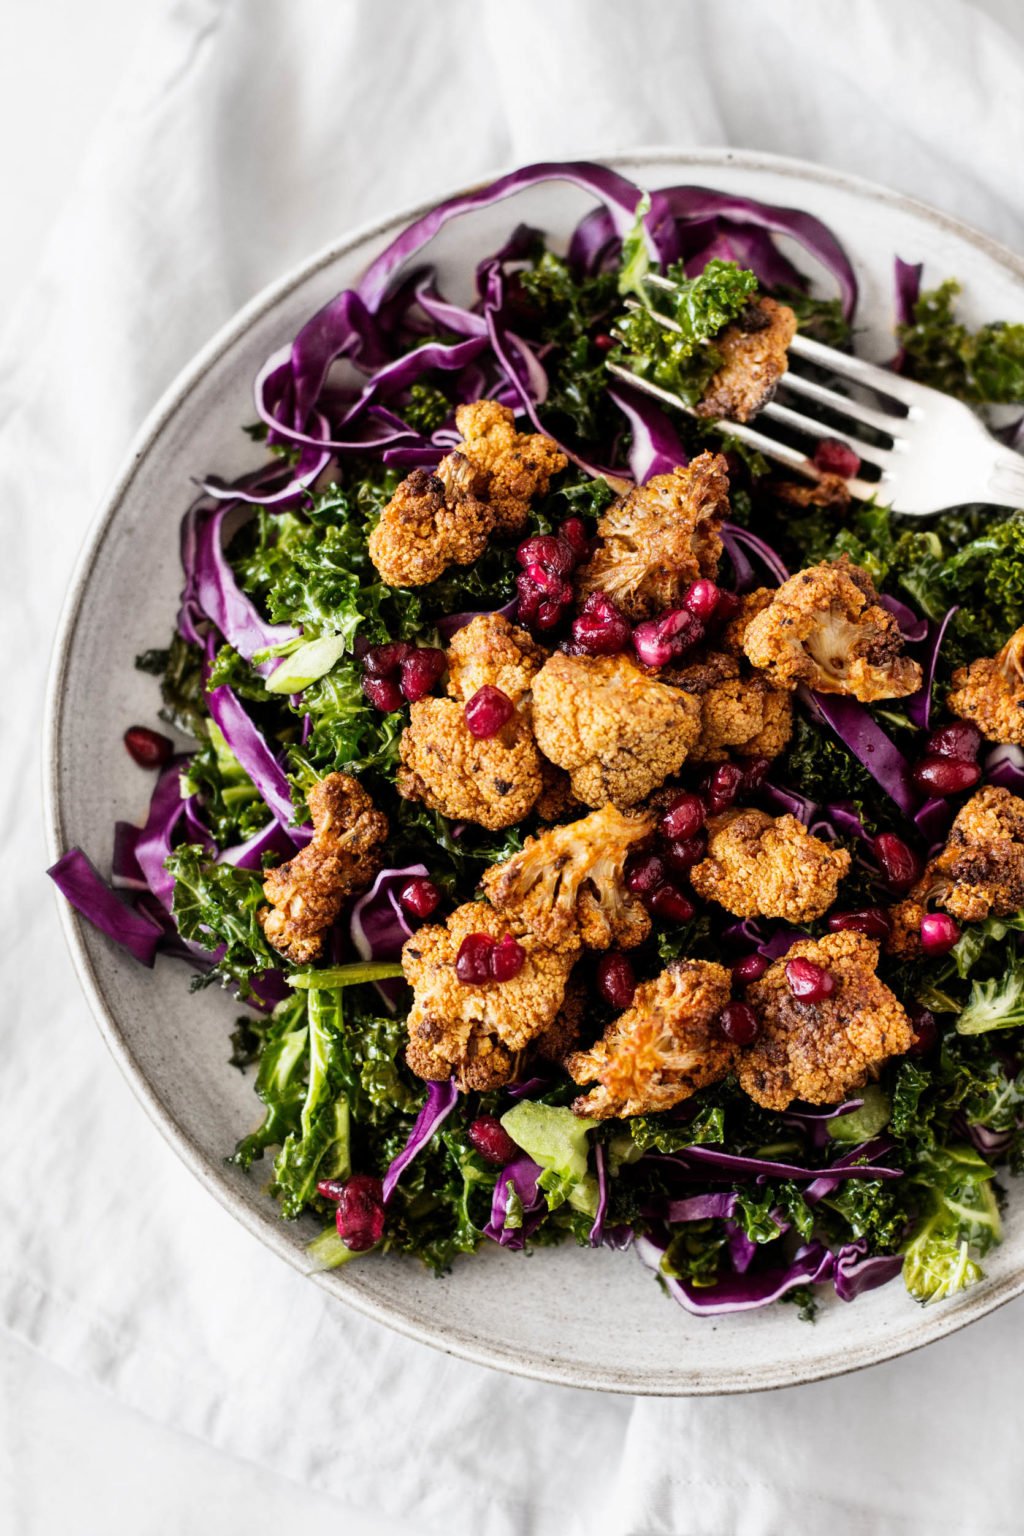 A shallow plate holds a festive, colorful salad of spiced, roasted cauliflower, raw kale, and pomegranate seeds.